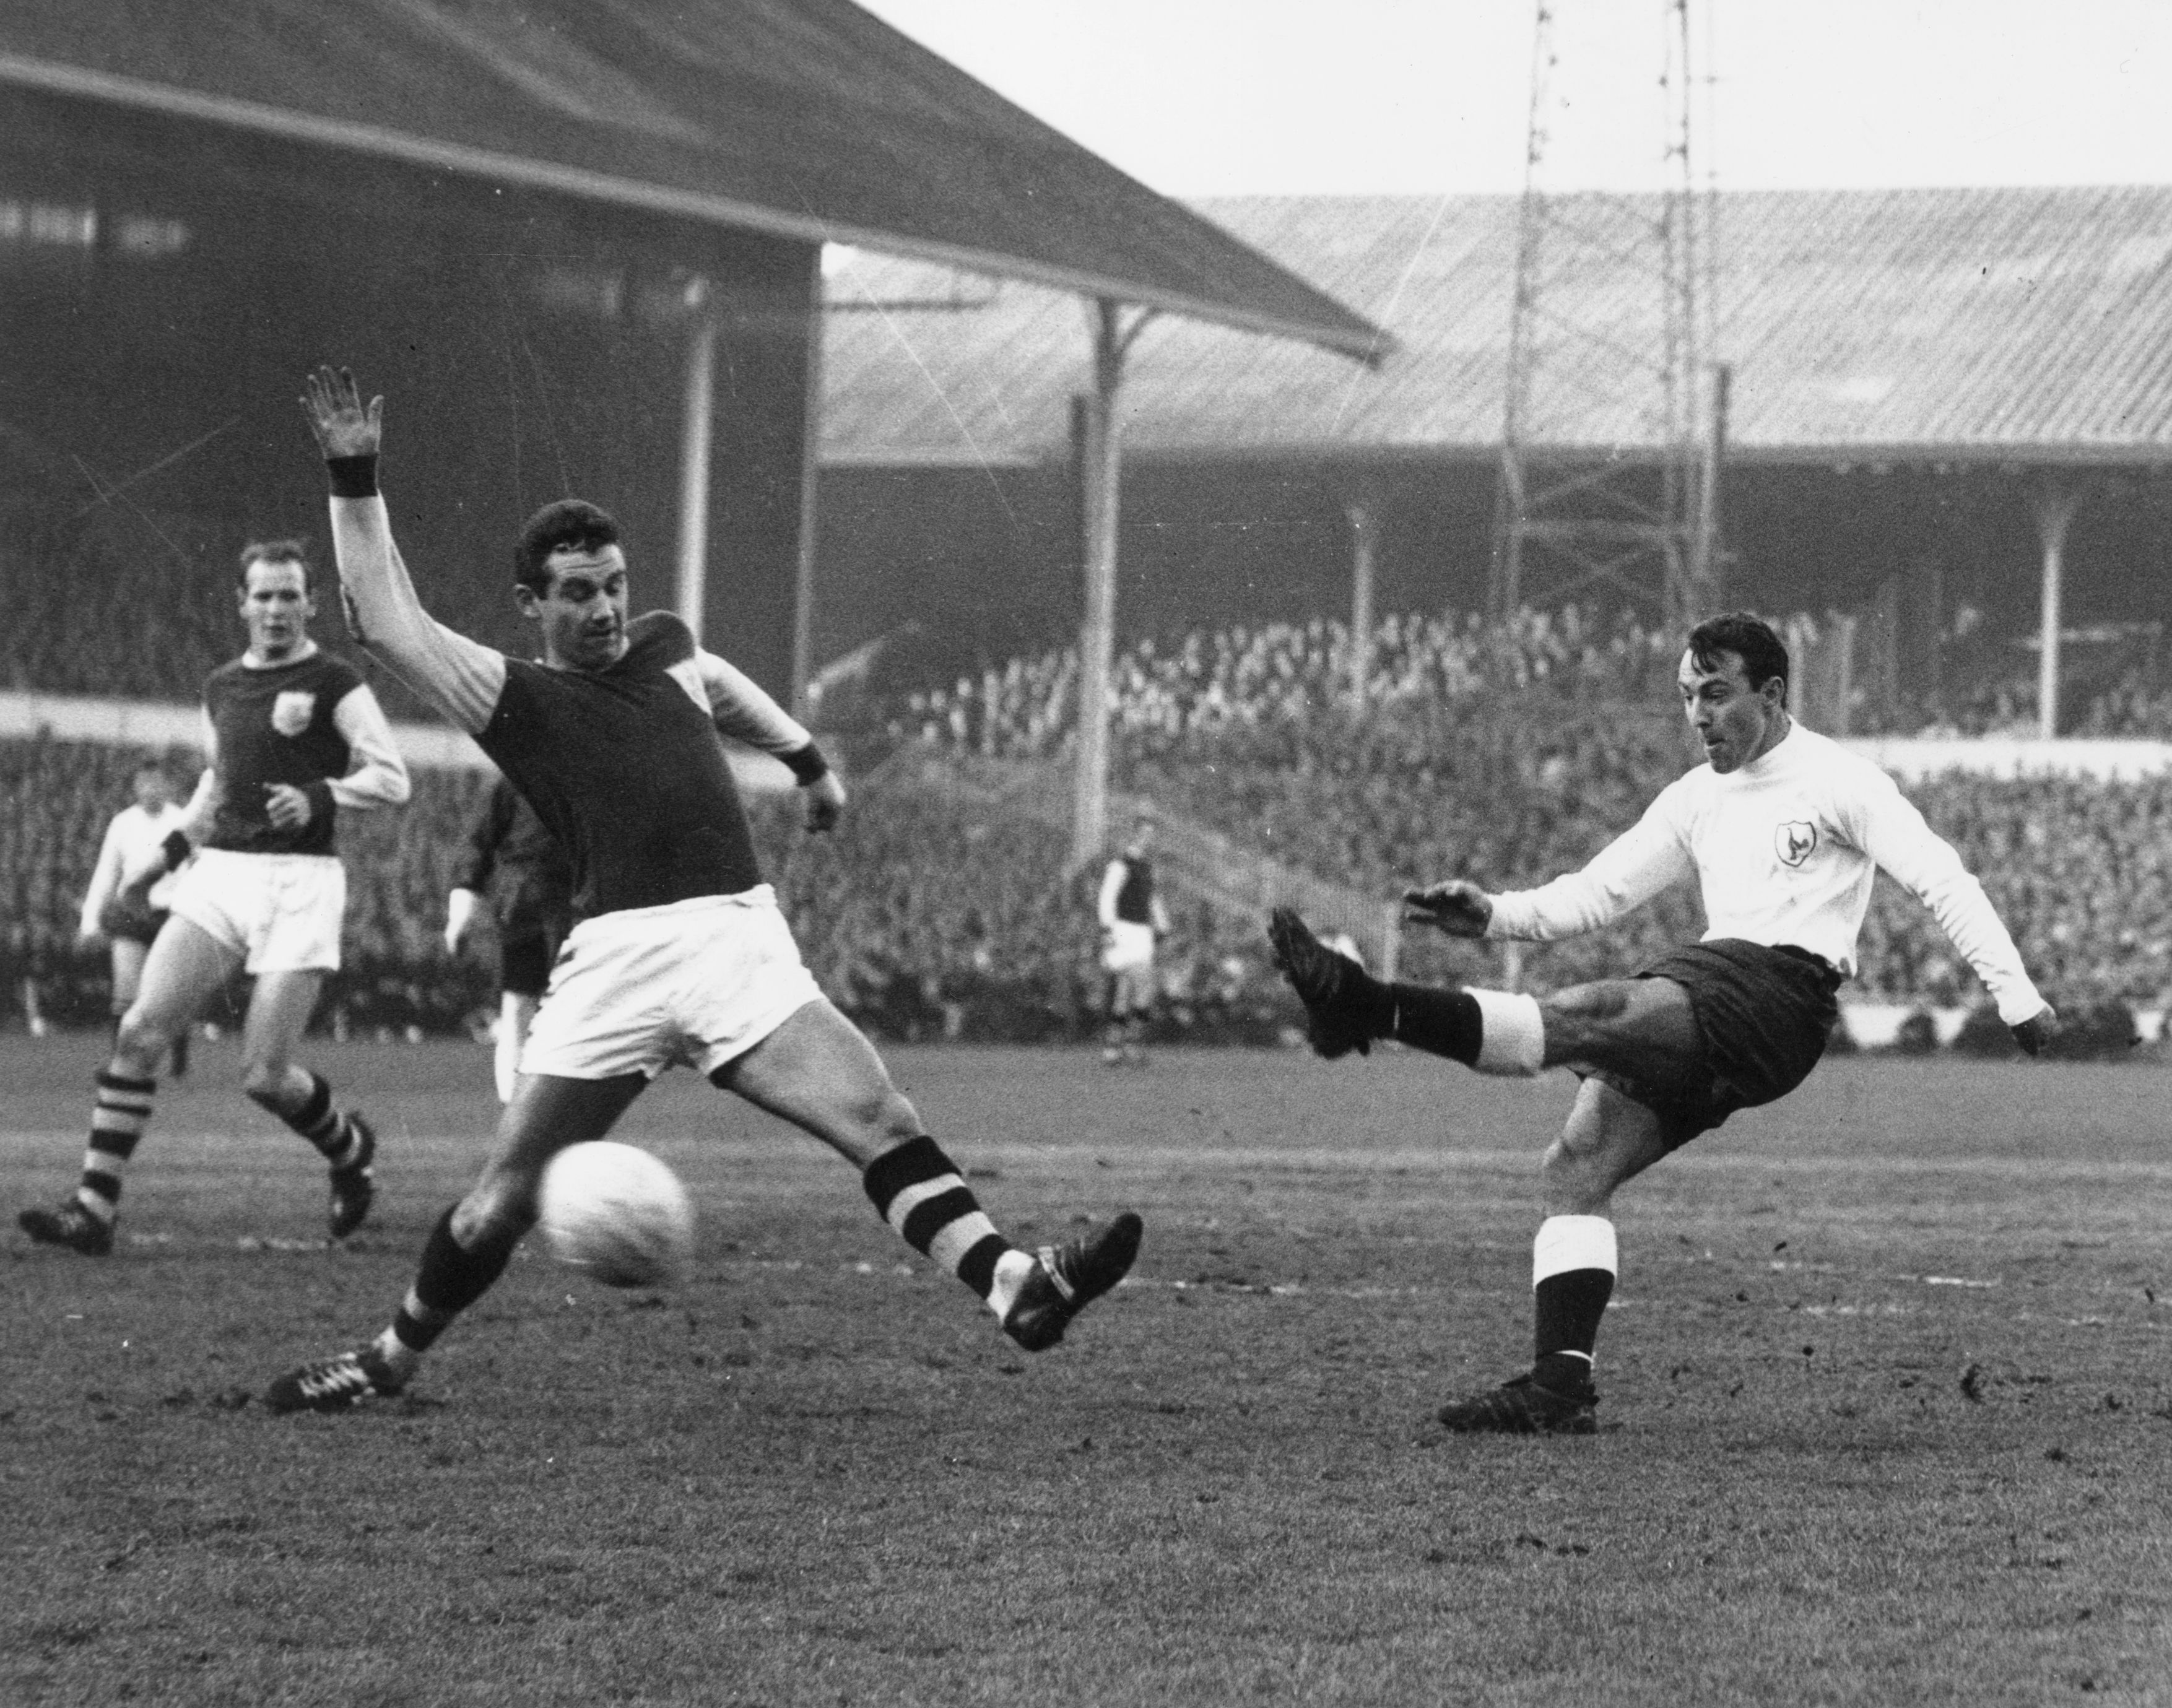 Jimmy Greaves takes a shot against Burnley in 1963.